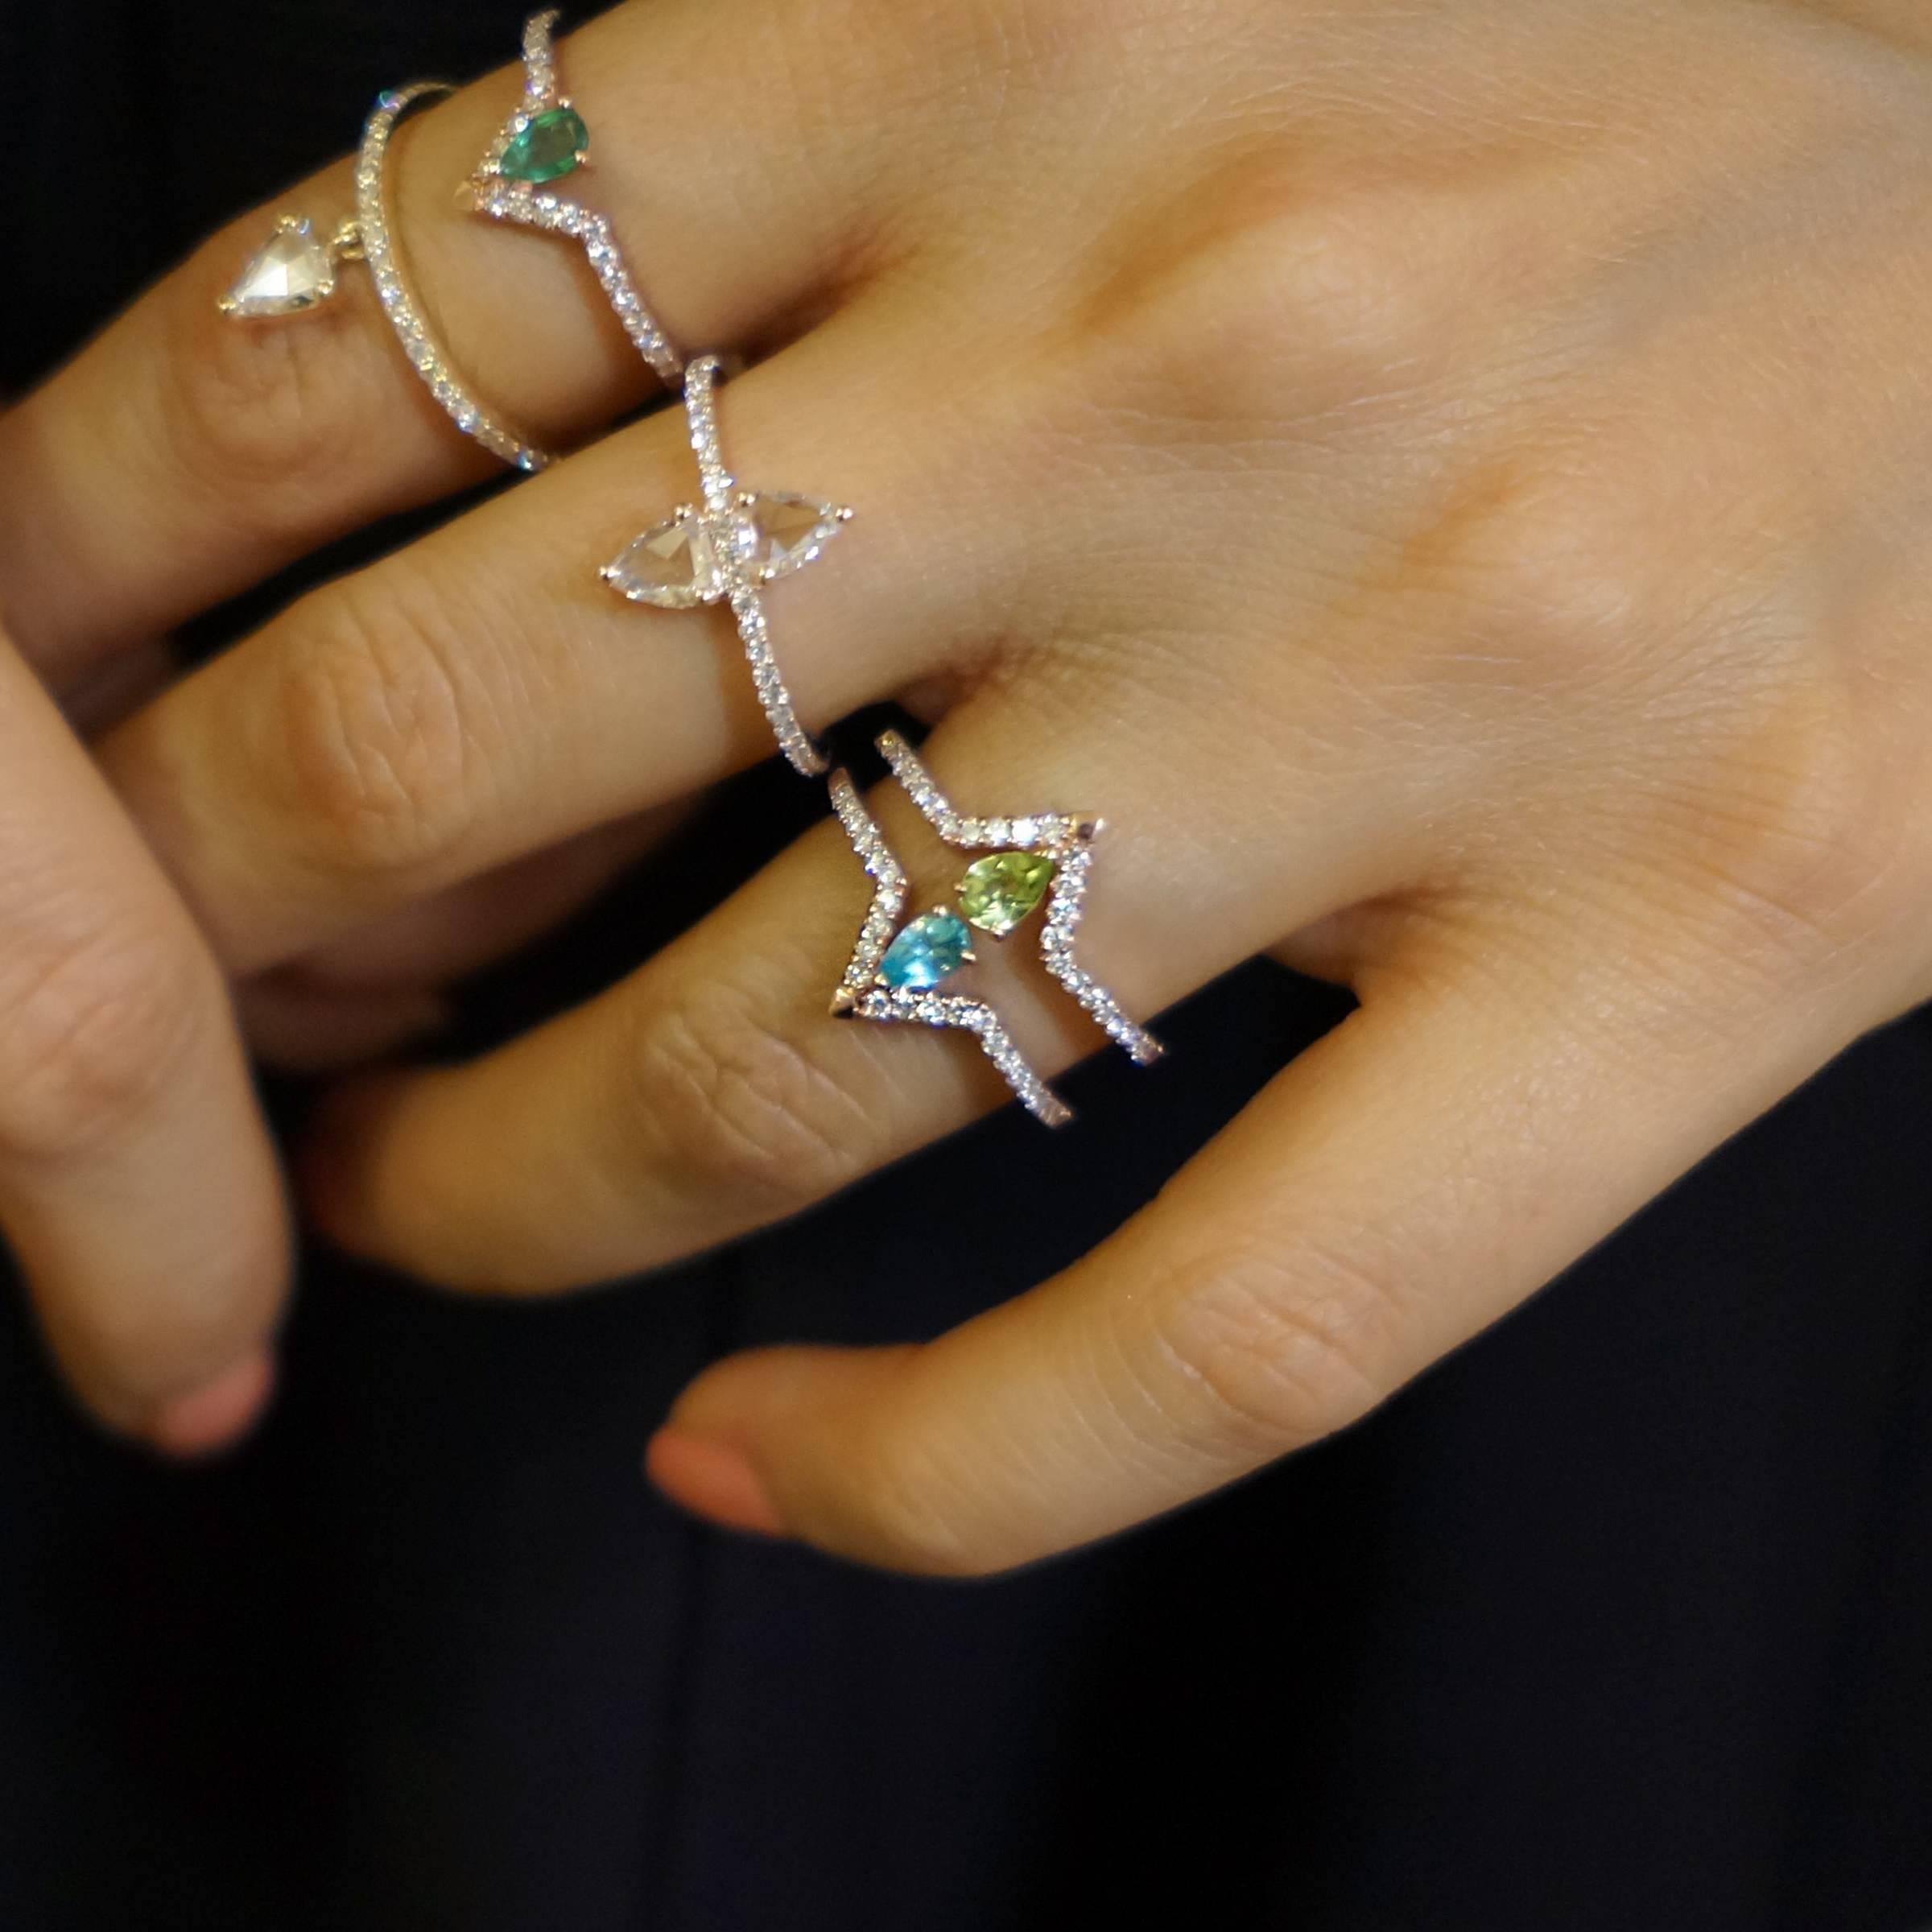 Balancing classic aesthetics with modern sensibilities, Ri Noor's Pear Paraiba Blue Apatite and Diamond Ring is designed to elevate any outfit, no matter the occasion. The ring features a vivid pear cut ruby resting in a V-shaped recess along the